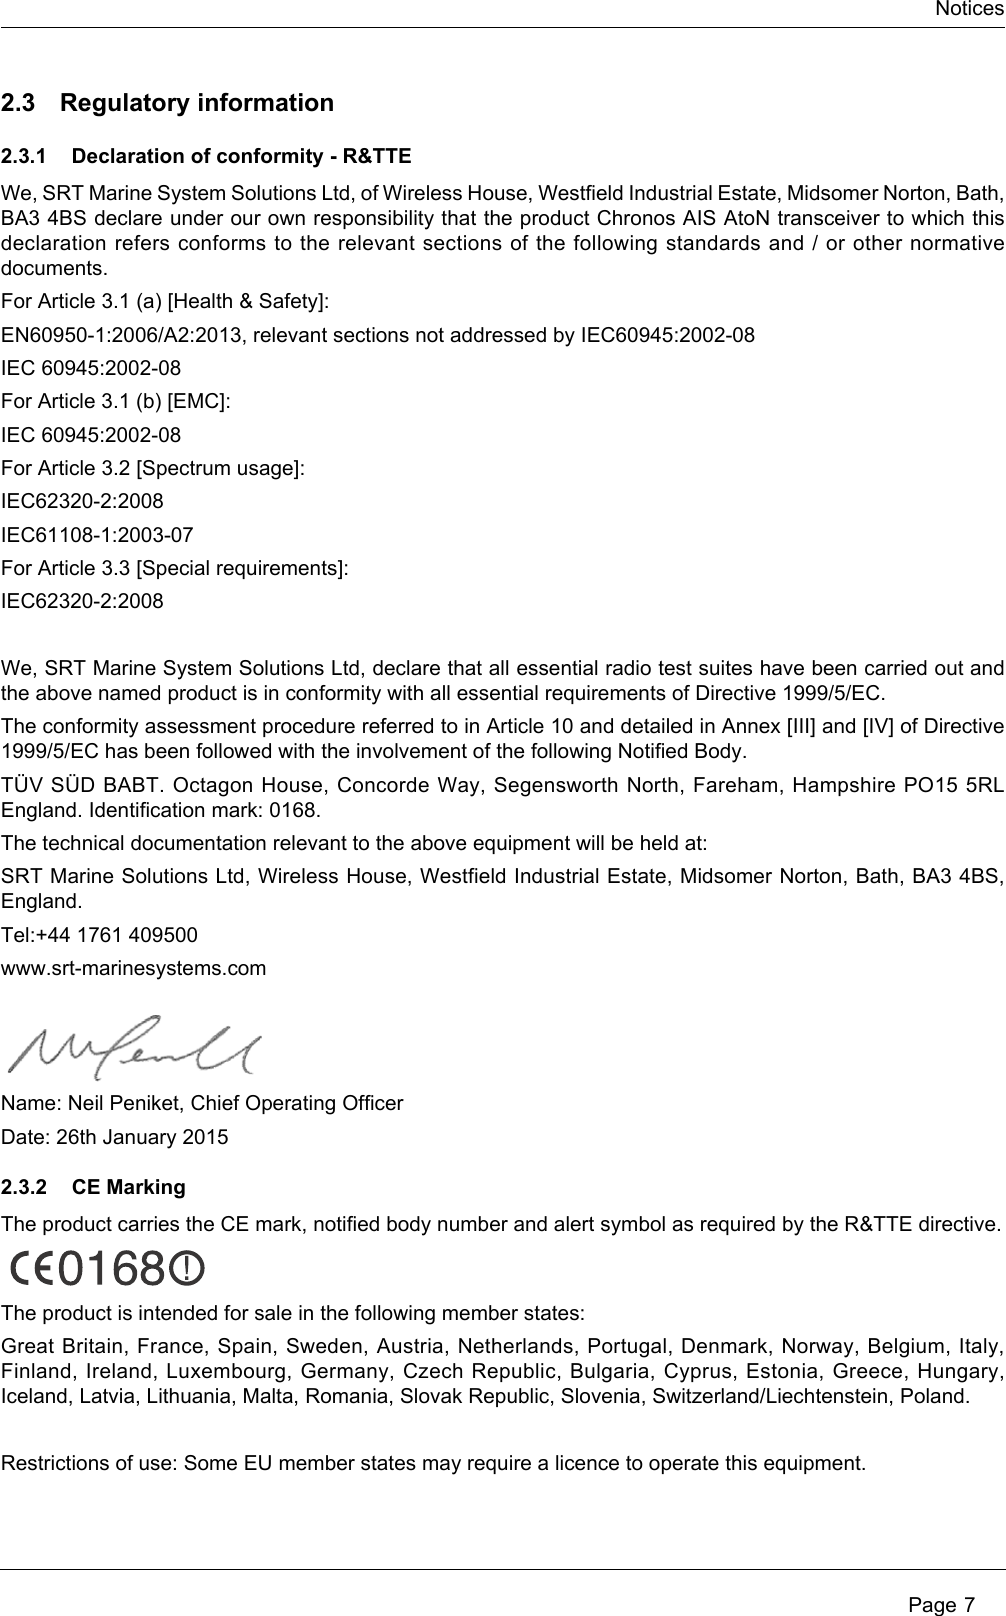 Notices Page 72.3 Regulatory information2.3.1 Declaration of conformity - R&amp;TTEWe, SRT Marine System Solutions Ltd, of Wireless House, Westfield Industrial Estate, Midsomer Norton, Bath, BA3 4BS declare under our own responsibility that the product Chronos AIS AtoN transceiver to which this declaration refers conforms to the relevant sections of the following standards and / or other normative documents.For Article 3.1 (a) [Health &amp; Safety]:EN60950-1:2006/A2:2013, relevant sections not addressed by IEC60945:2002-08IEC 60945:2002-08For Article 3.1 (b) [EMC]:IEC 60945:2002-08For Article 3.2 [Spectrum usage]:IEC62320-2:2008IEC61108-1:2003-07For Article 3.3 [Special requirements]:IEC62320-2:2008We, SRT Marine System Solutions Ltd, declare that all essential radio test suites have been carried out and the above named product is in conformity with all essential requirements of Directive 1999/5/EC.The conformity assessment procedure referred to in Article 10 and detailed in Annex [III] and [IV] of Directive 1999/5/EC has been followed with the involvement of the following Notified Body.TÜV SÜD BABT. Octagon House, Concorde Way, Segensworth North, Fareham, Hampshire PO15 5RL England. Identification mark: 0168.The technical documentation relevant to the above equipment will be held at: SRT Marine Solutions Ltd, Wireless House, Westfield Industrial Estate, Midsomer Norton, Bath, BA3 4BS, England.Tel:+44 1761 409500www.srt-marinesystems.comName: Neil Peniket, Chief Operating OfficerDate: 26th January 20152.3.2 CE MarkingThe product carries the CE mark, notified body number and alert symbol as required by the R&amp;TTE directive.The product is intended for sale in the following member states:Great Britain, France, Spain, Sweden, Austria, Netherlands, Portugal, Denmark, Norway, Belgium, Italy, Finland, Ireland, Luxembourg, Germany, Czech Republic, Bulgaria, Cyprus, Estonia, Greece, Hungary, Iceland, Latvia, Lithuania, Malta, Romania, Slovak Republic, Slovenia, Switzerland/Liechtenstein, Poland.Restrictions of use: Some EU member states may require a licence to operate this equipment.